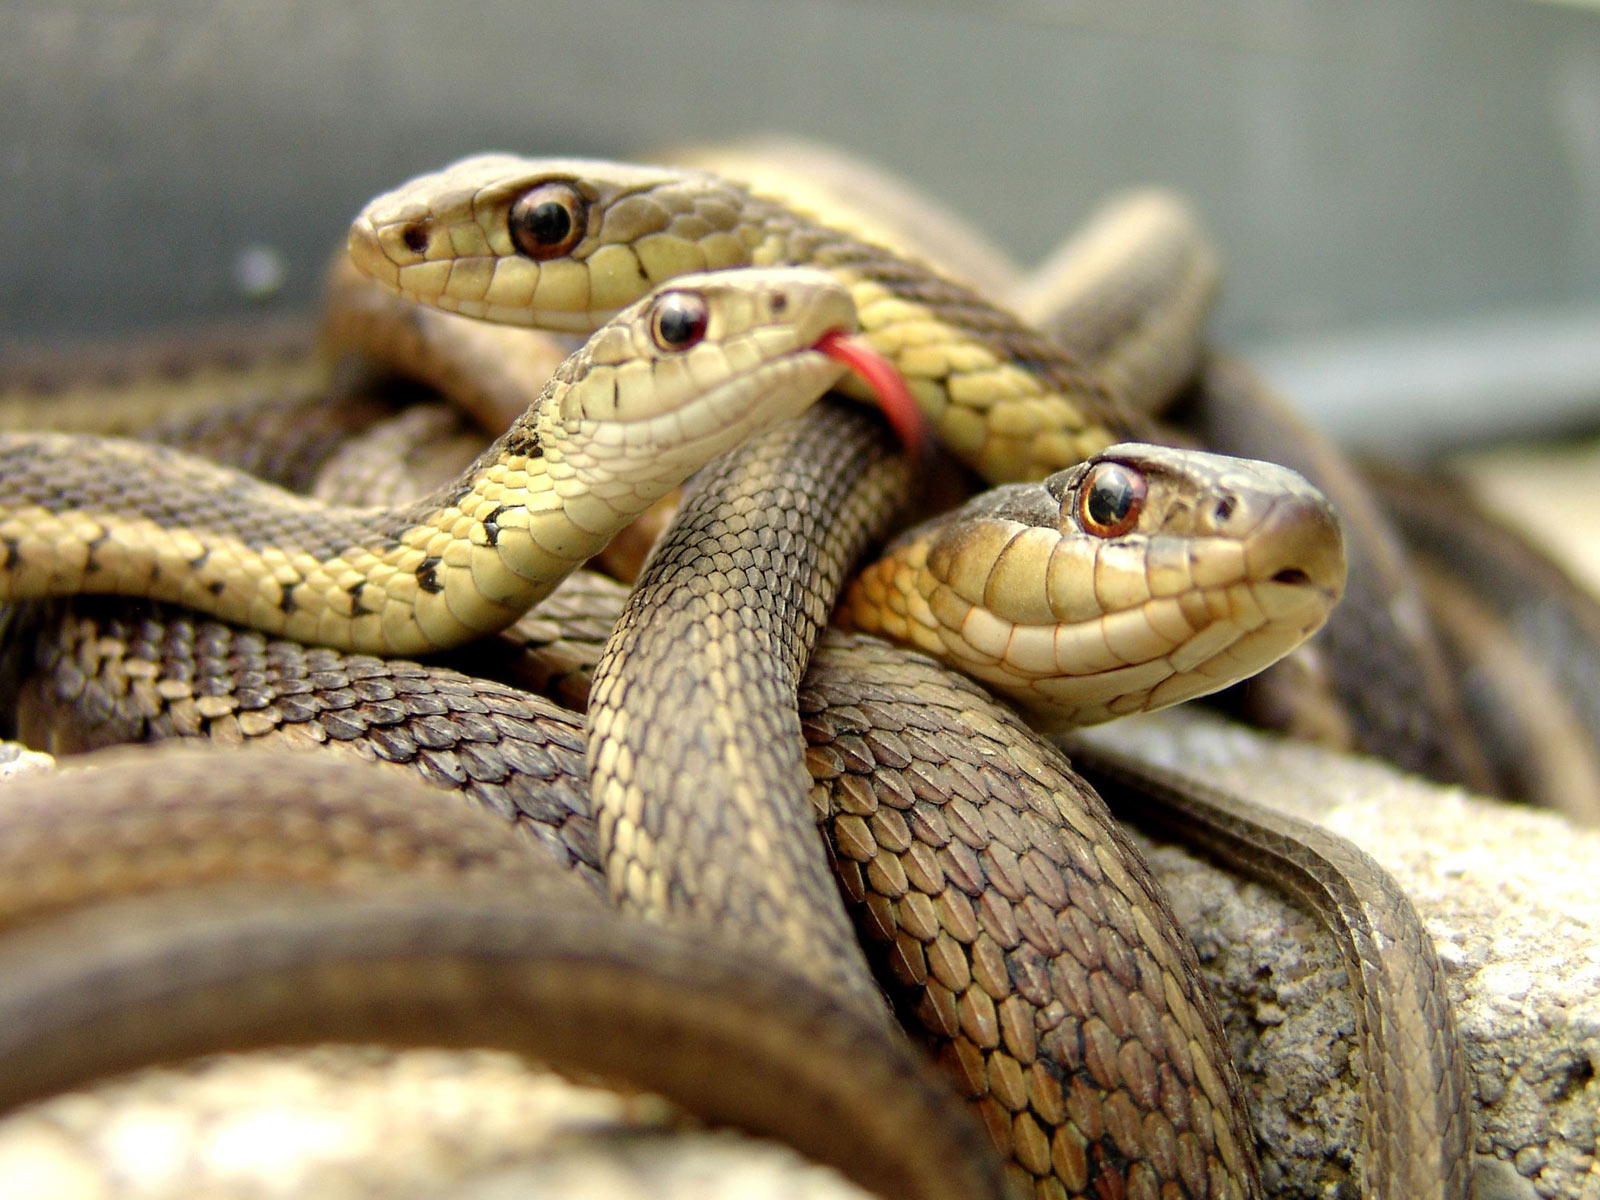 big snakes dangerous pictures big snakes latest hd wallpapers 2013